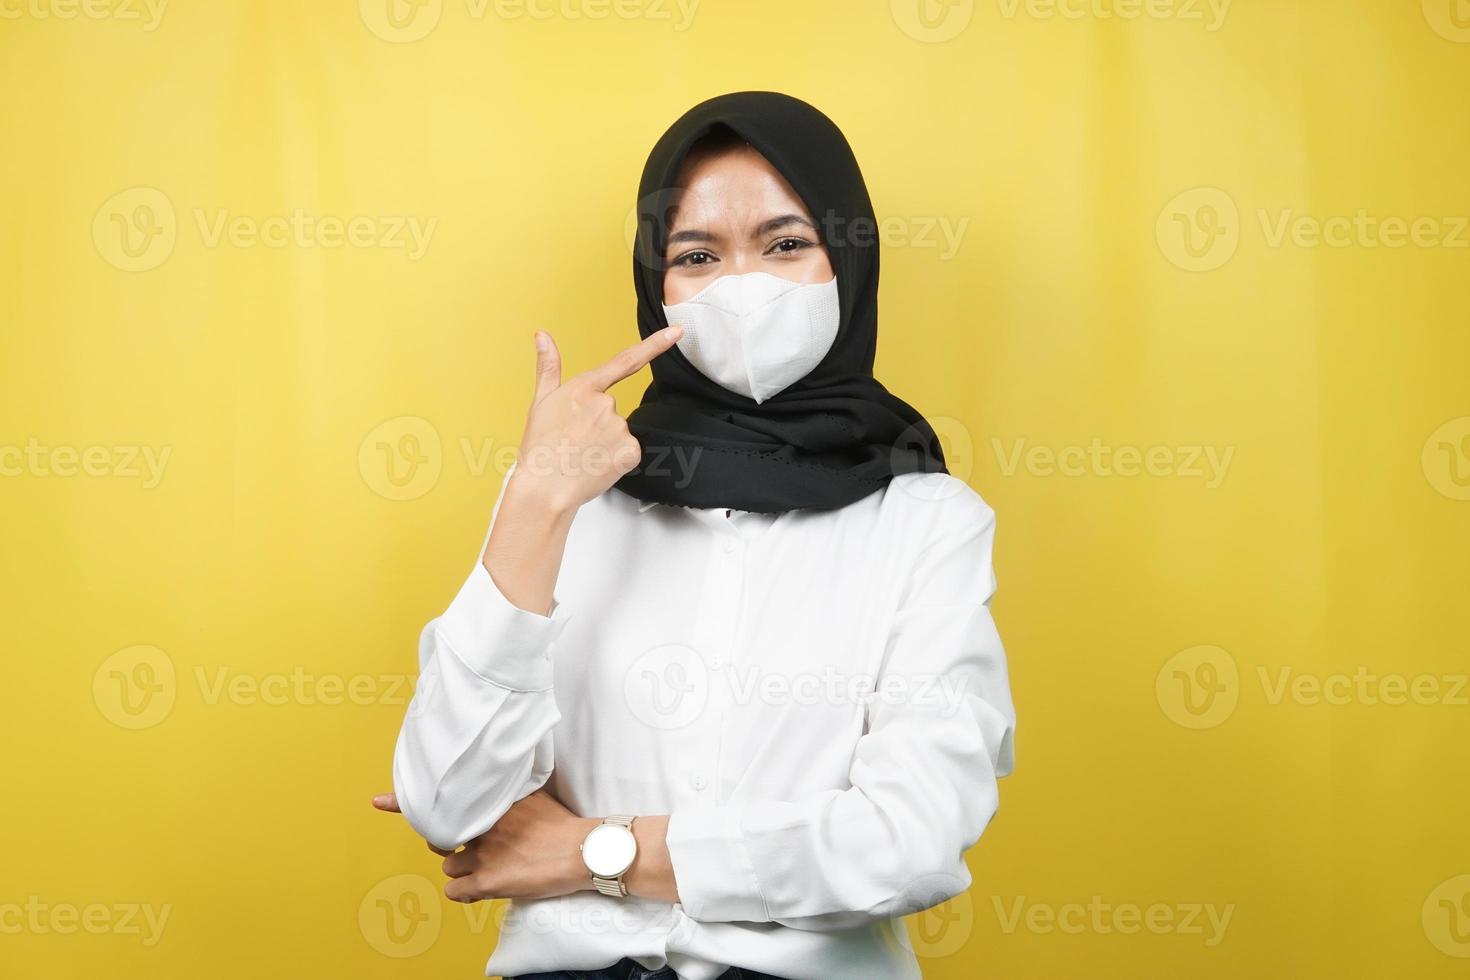 Muslim woman wearing white mask, with hand pointing to mask, prevent corona virus gesture, prevent covid-19, isolated on yellow background photo